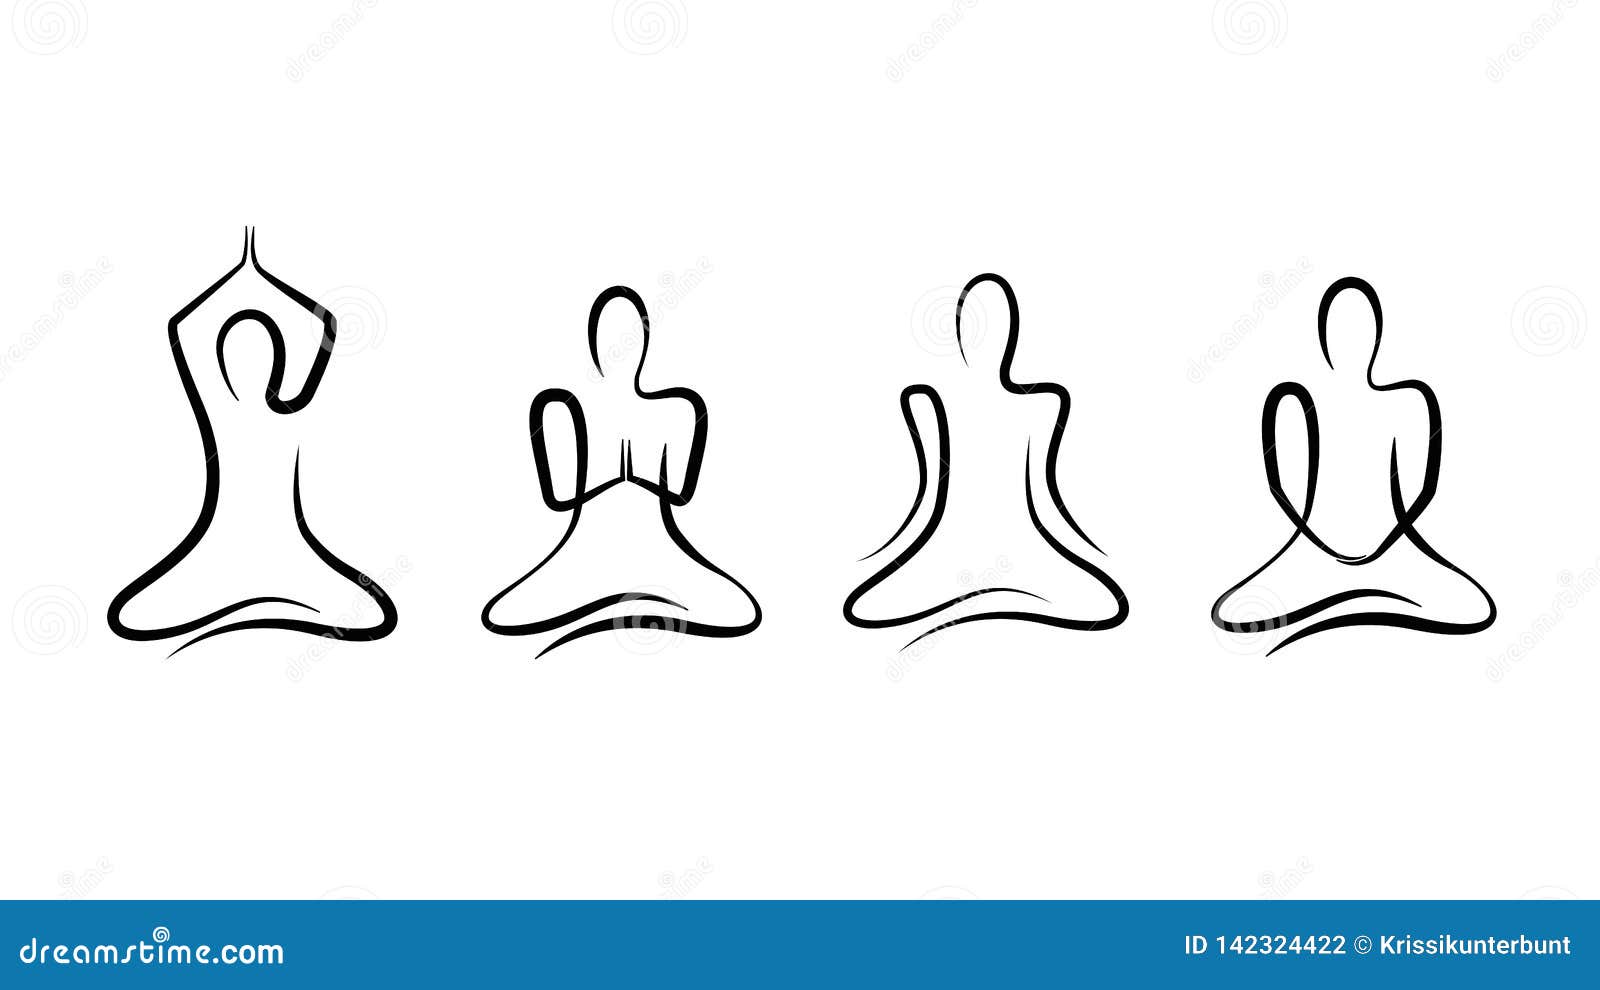 Yoga drawing exercising gestures cat nature elements sketch Vectors graphic  art designs in editable .ai .eps .svg .cdr format free and easy download  unlimit id:6852229